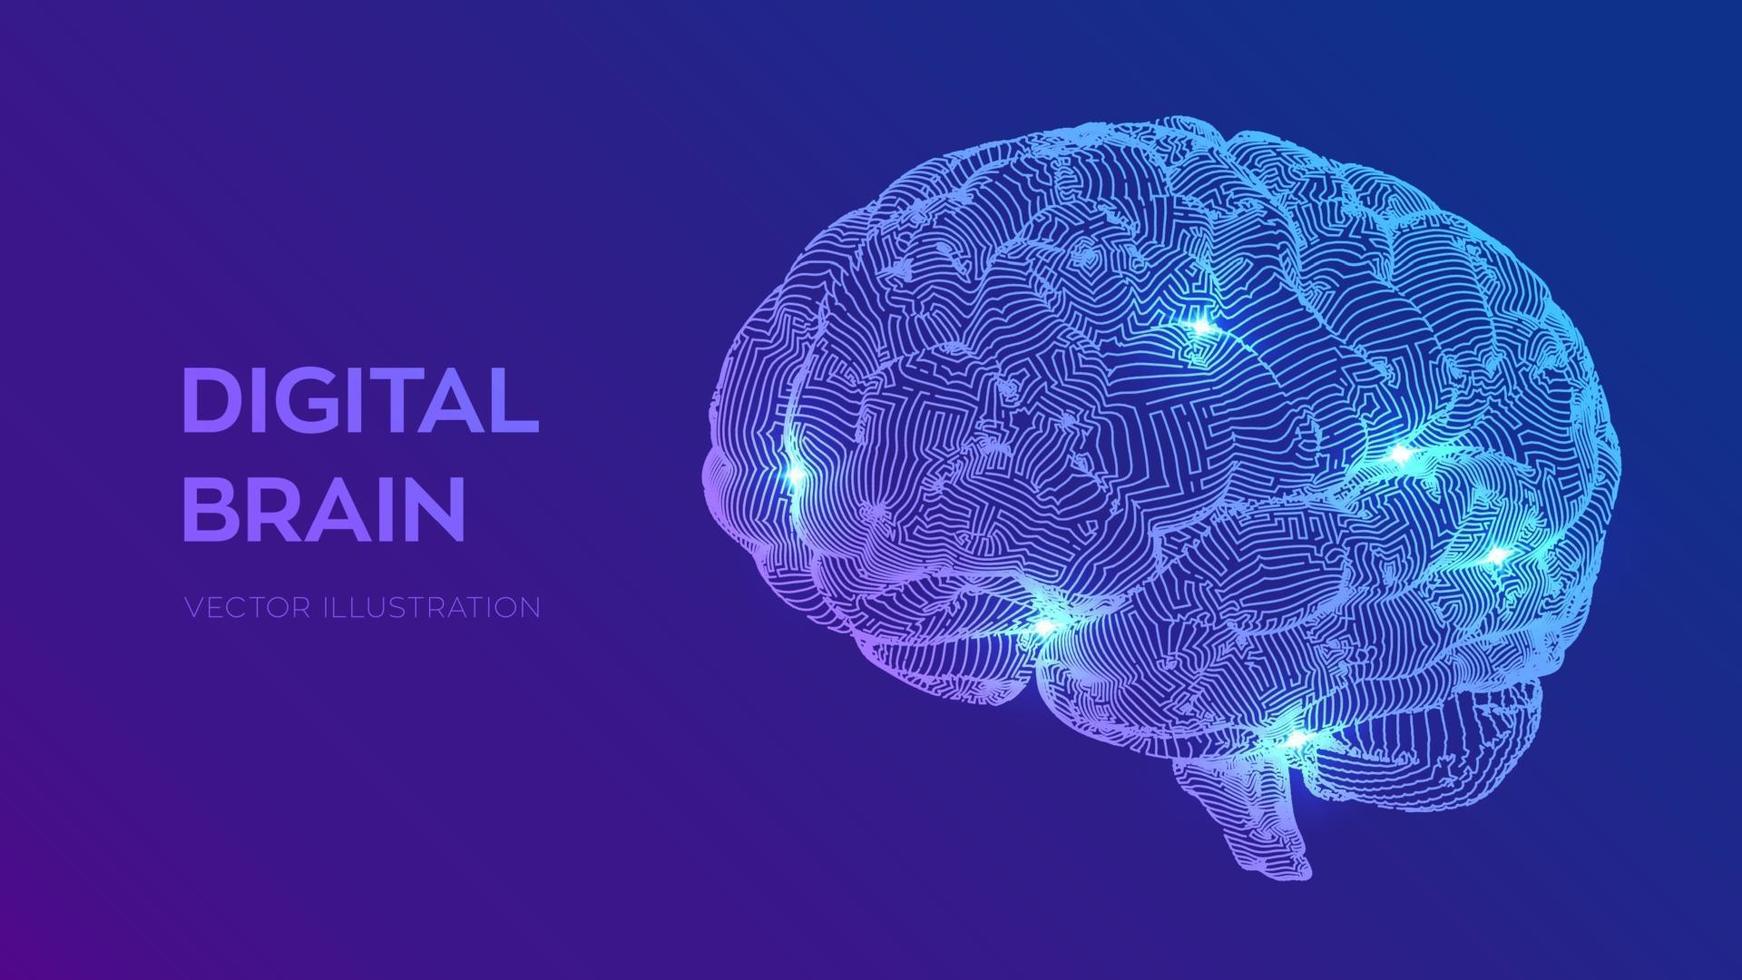 Digital brain. 3D Science and Technology concept. Neural network. IQ testing, artificial intelligence virtual emulation science technology. Brainstorm think idea. vector